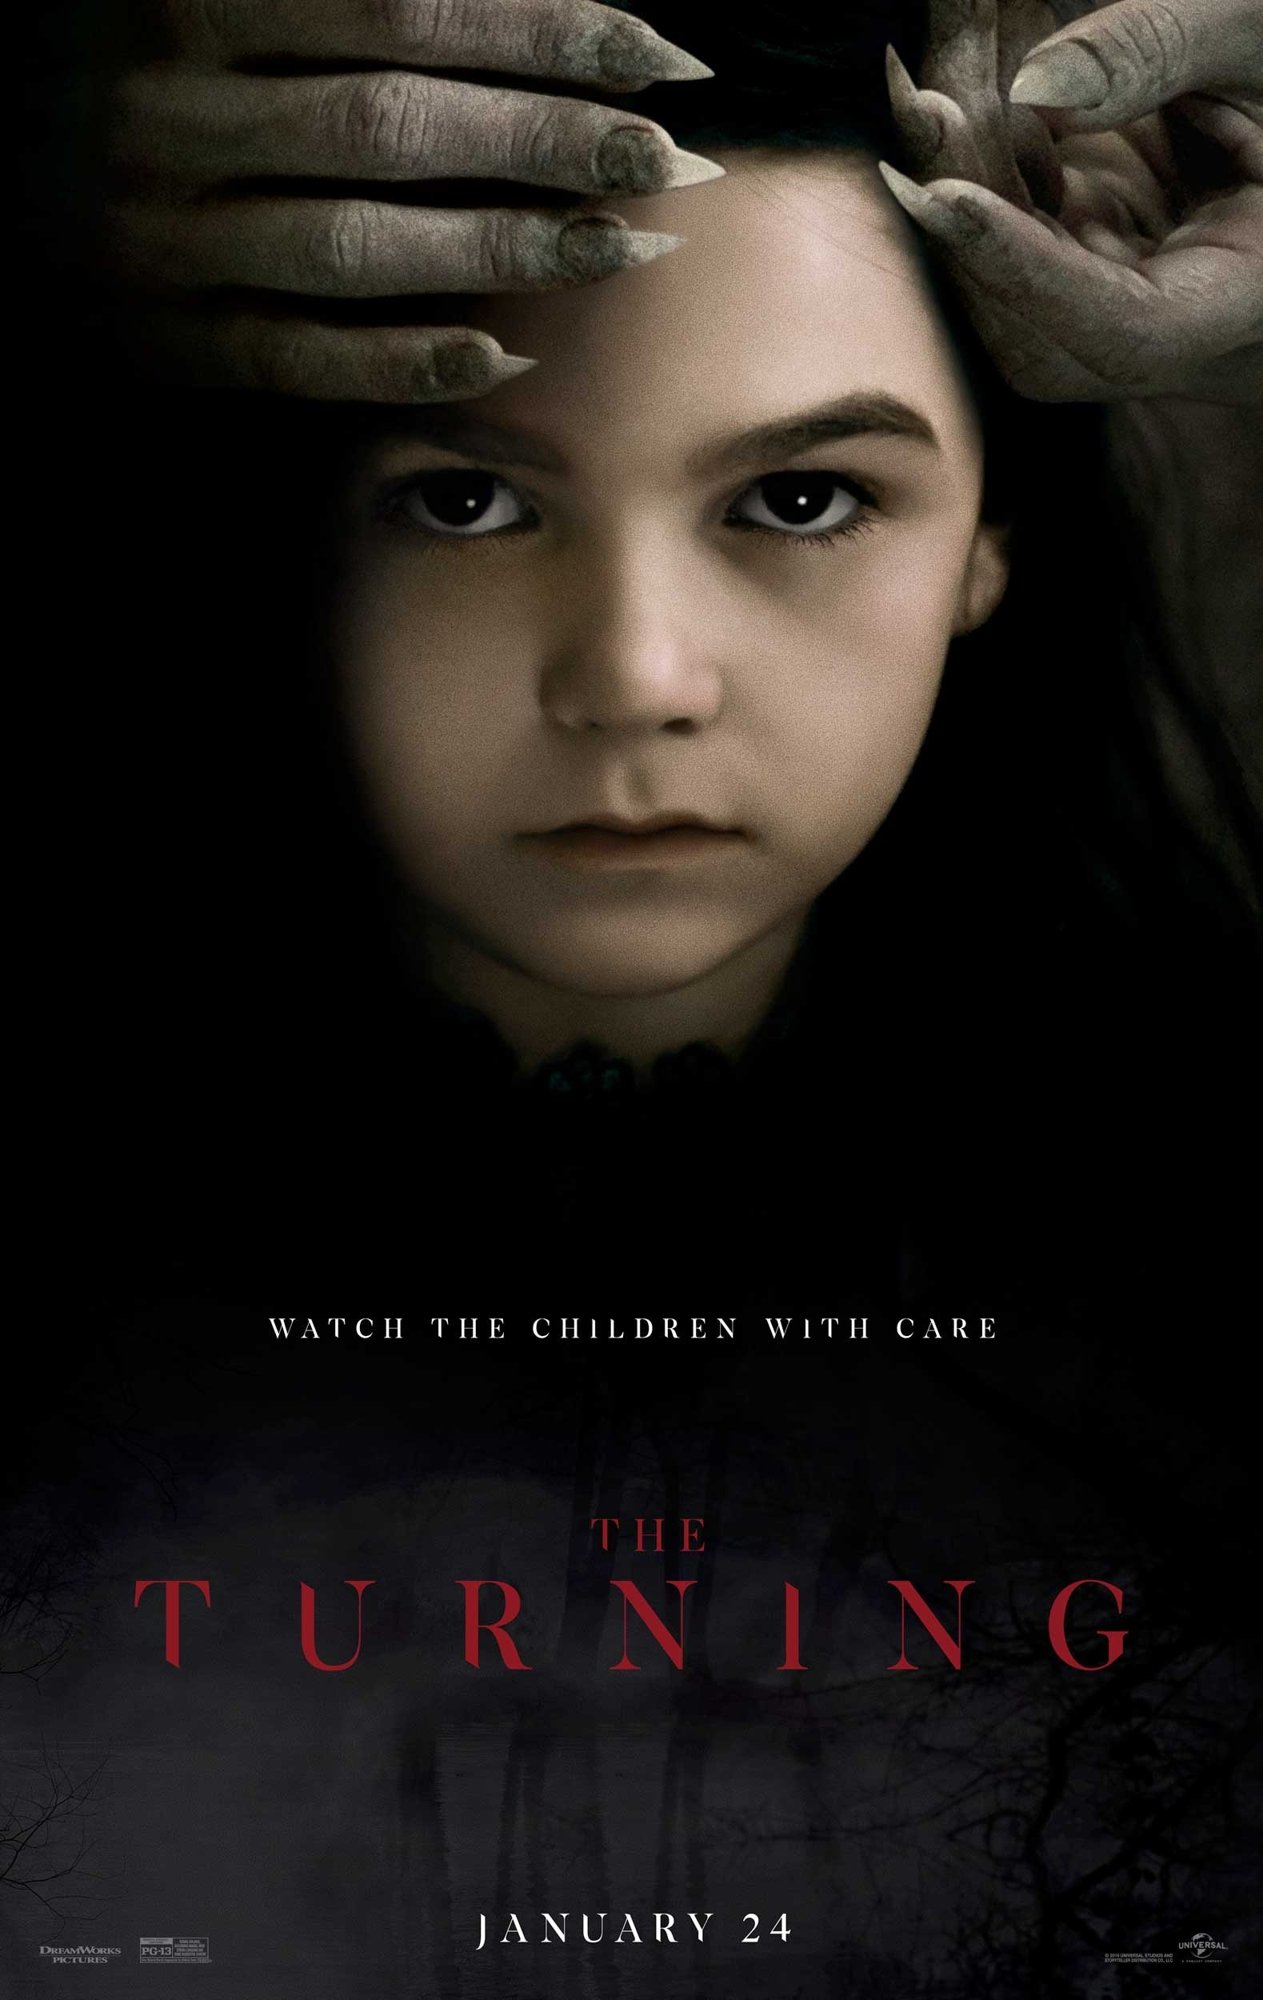 The Turning (2020) Pictures, Trailer, Reviews, News, DVD and Soundtrack1263 x 2000